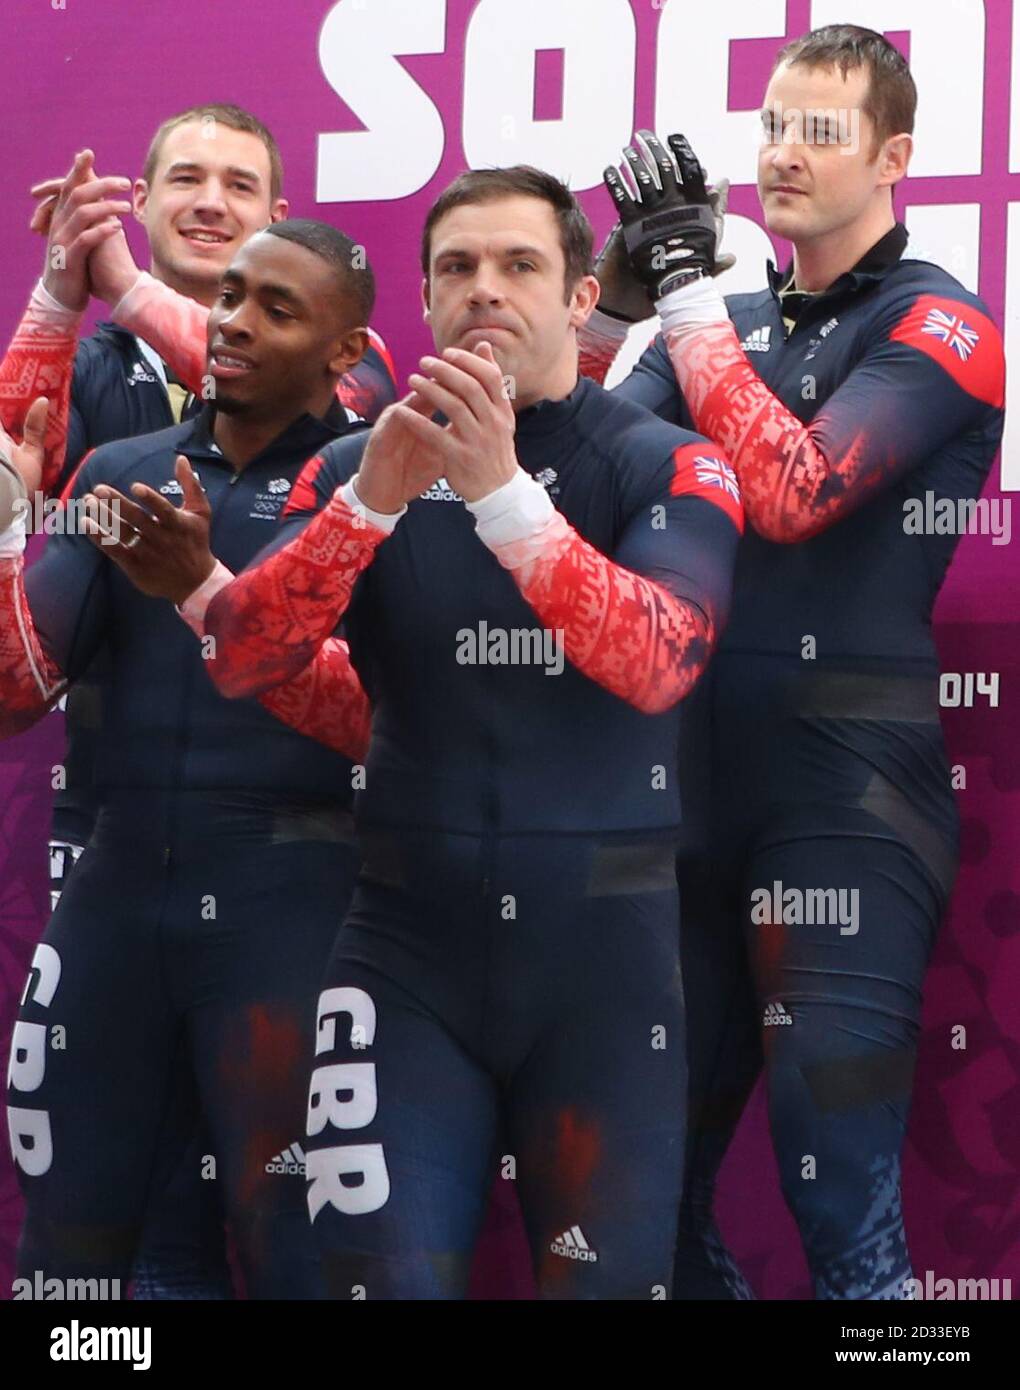 Great Britain Men's Bobsleigh GBR-1 Team of (left to right) Stuart Benson, Joel Fearon, John Jackson and Bruce Tasker after their fourth run of the men's 4 man Bobsleigh at the Sanki Sliding Centre during the 2014 Sochi Olympic Games in Krasnaya Polyana, Sochi. Russia. Stock Photo